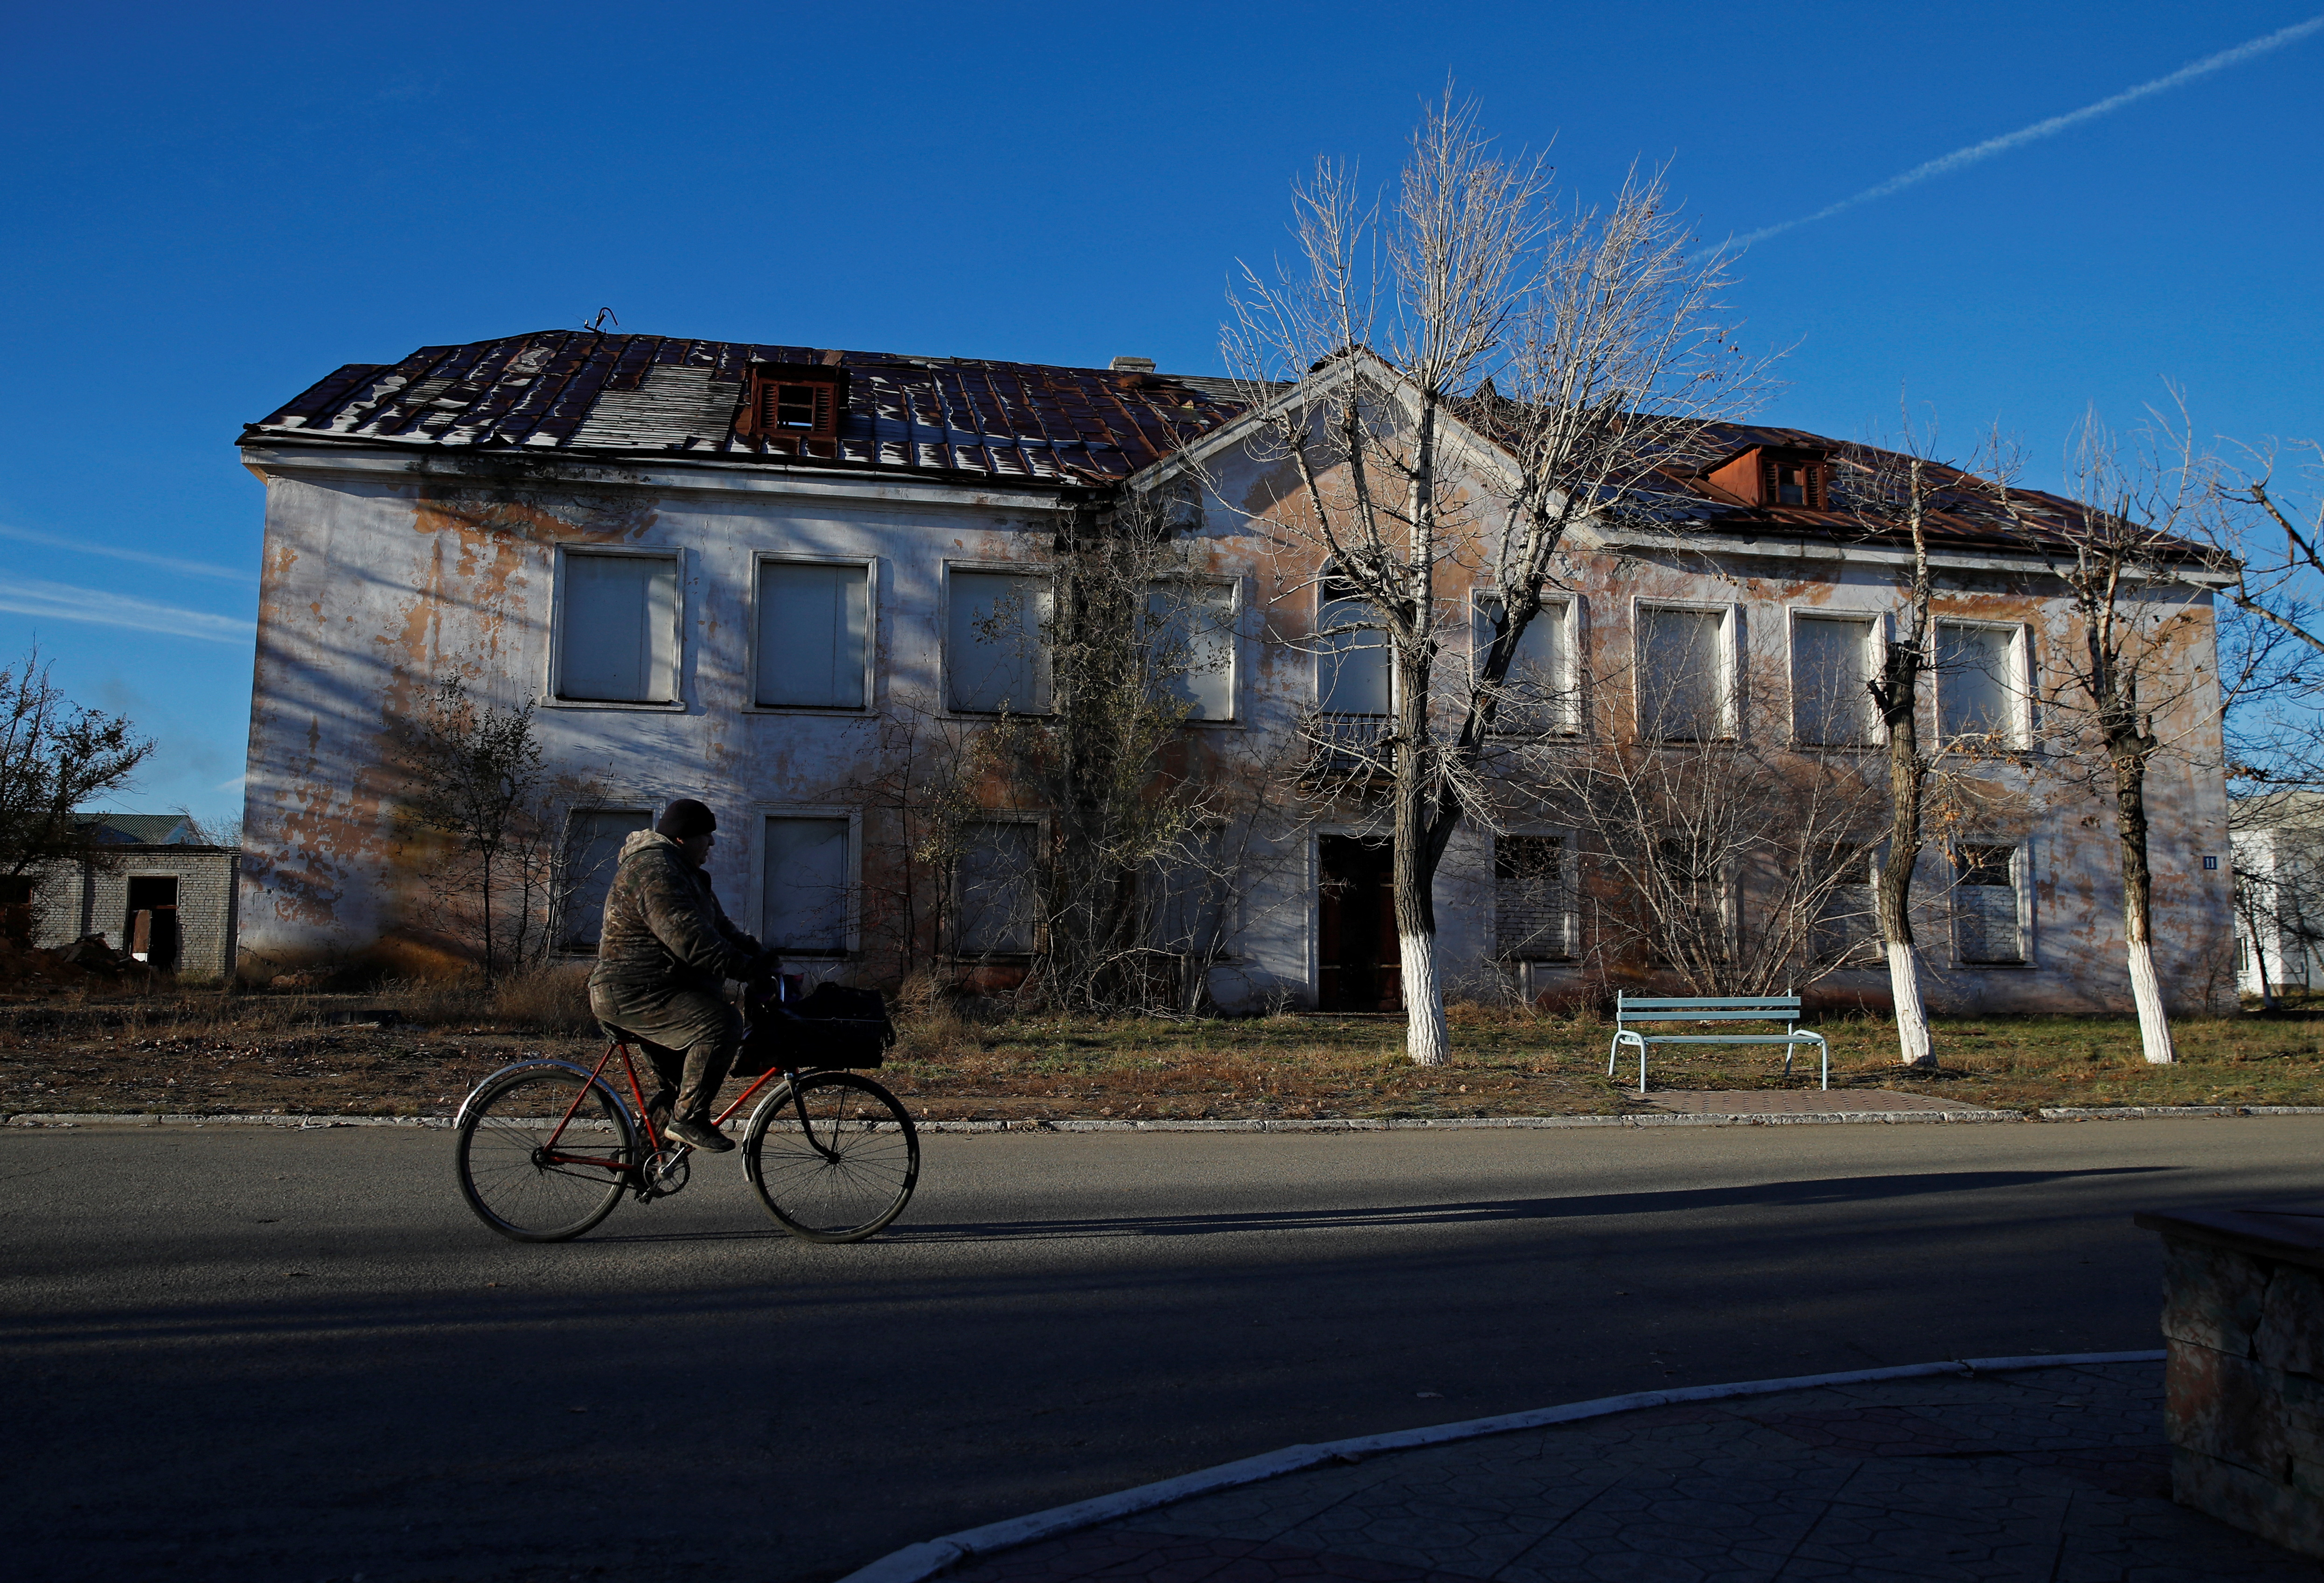 A man rides a bicycle past an abandoned building in Kurchatov